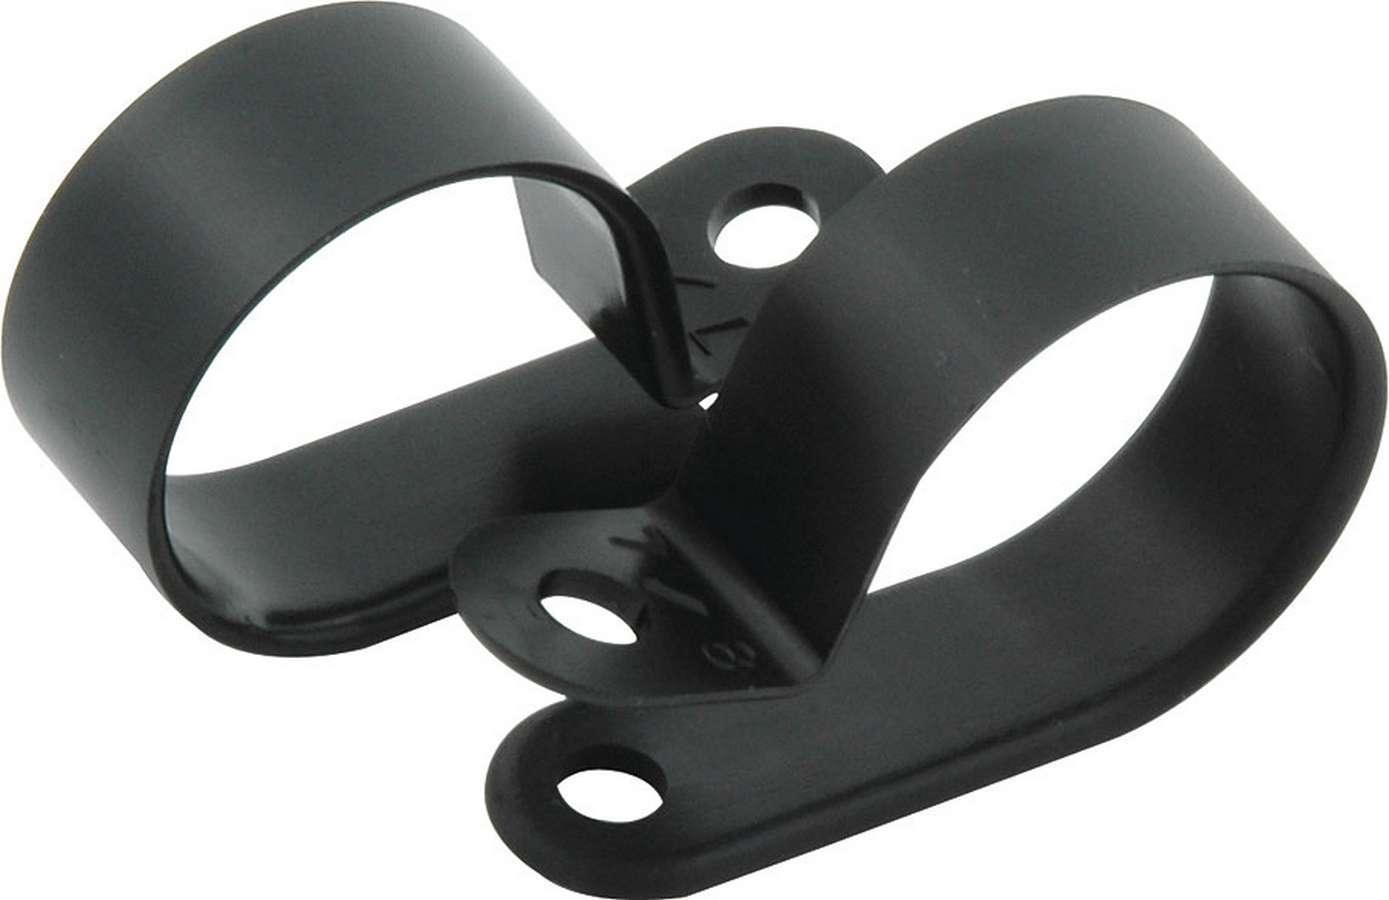 Nylon Line Clamps 3/4in 50pk - Burlile Performance Products